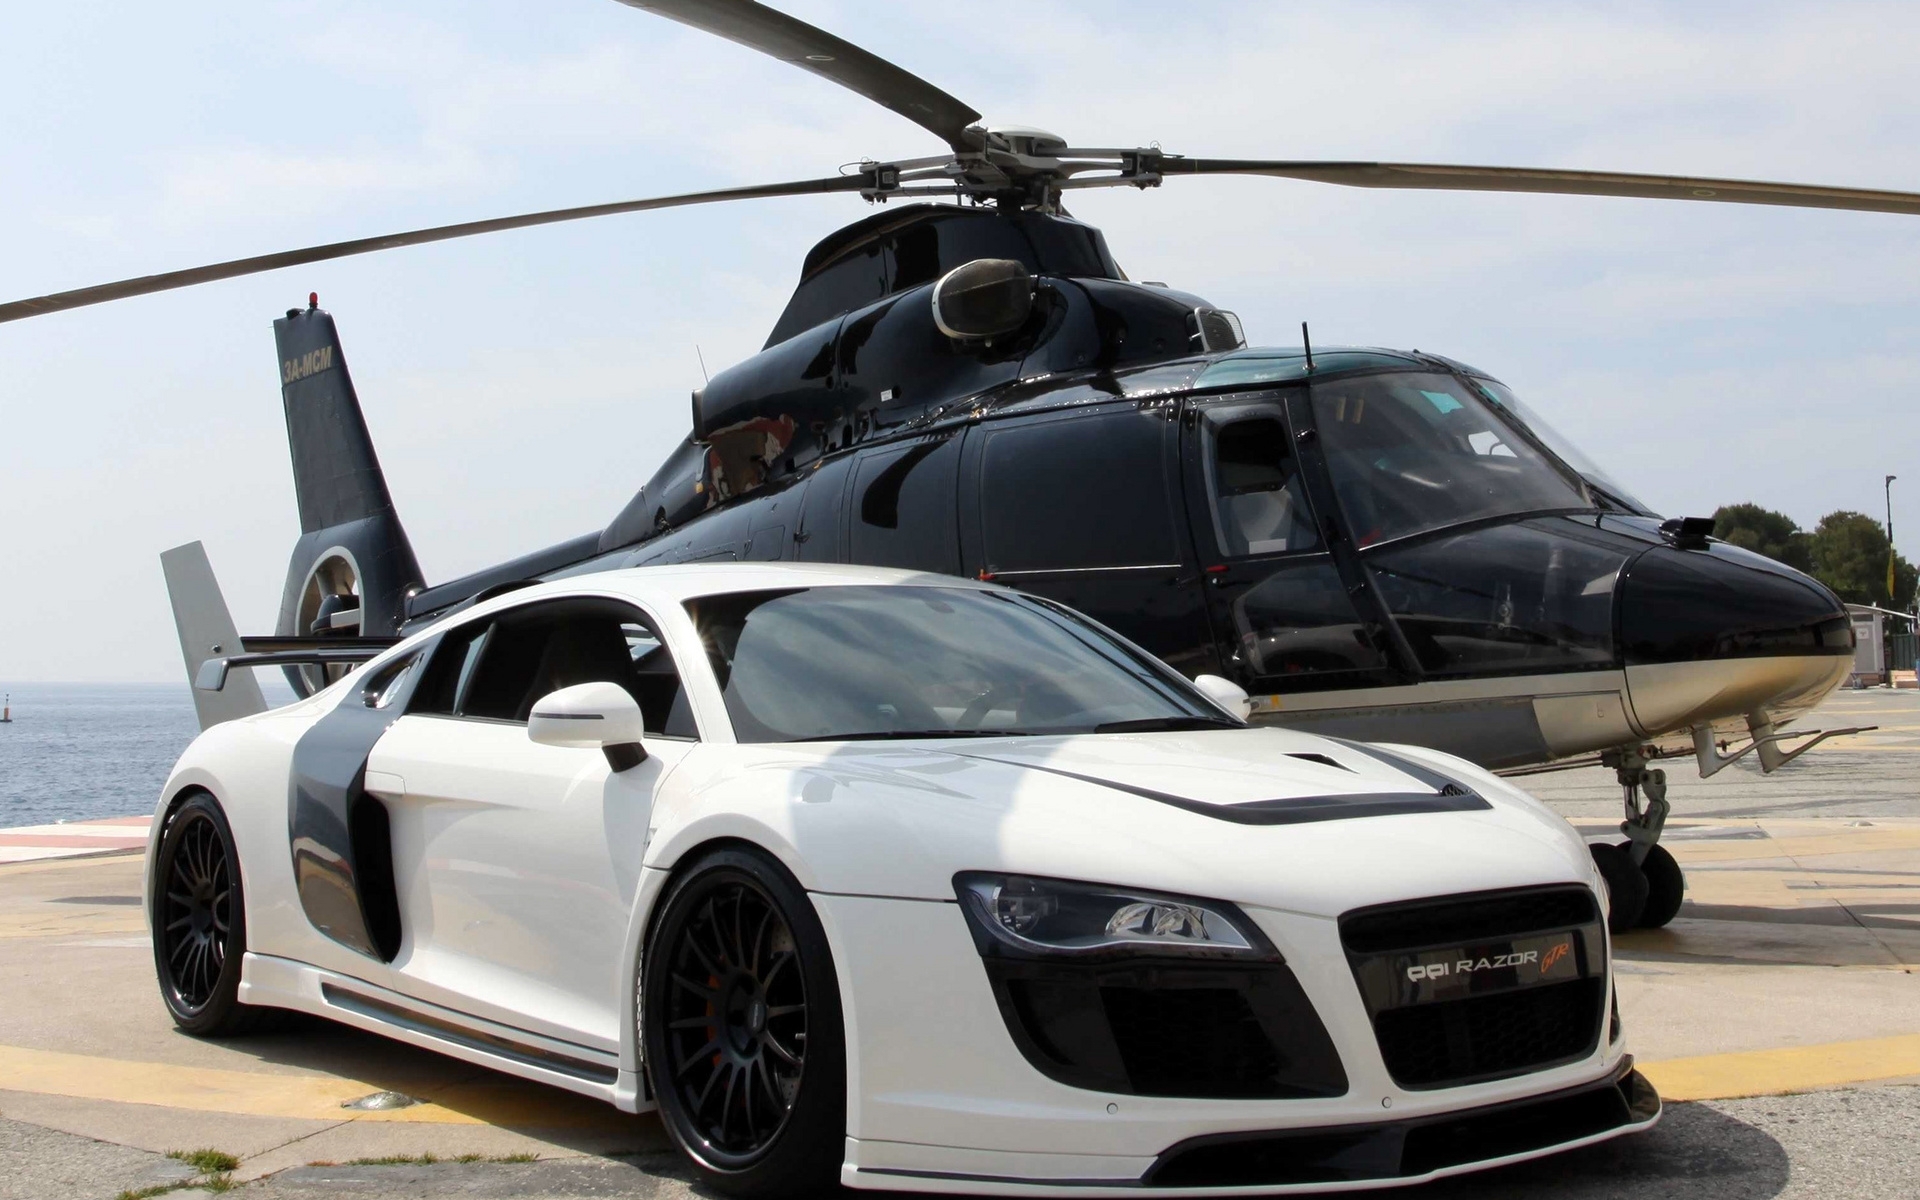 helicopters, transport, auto